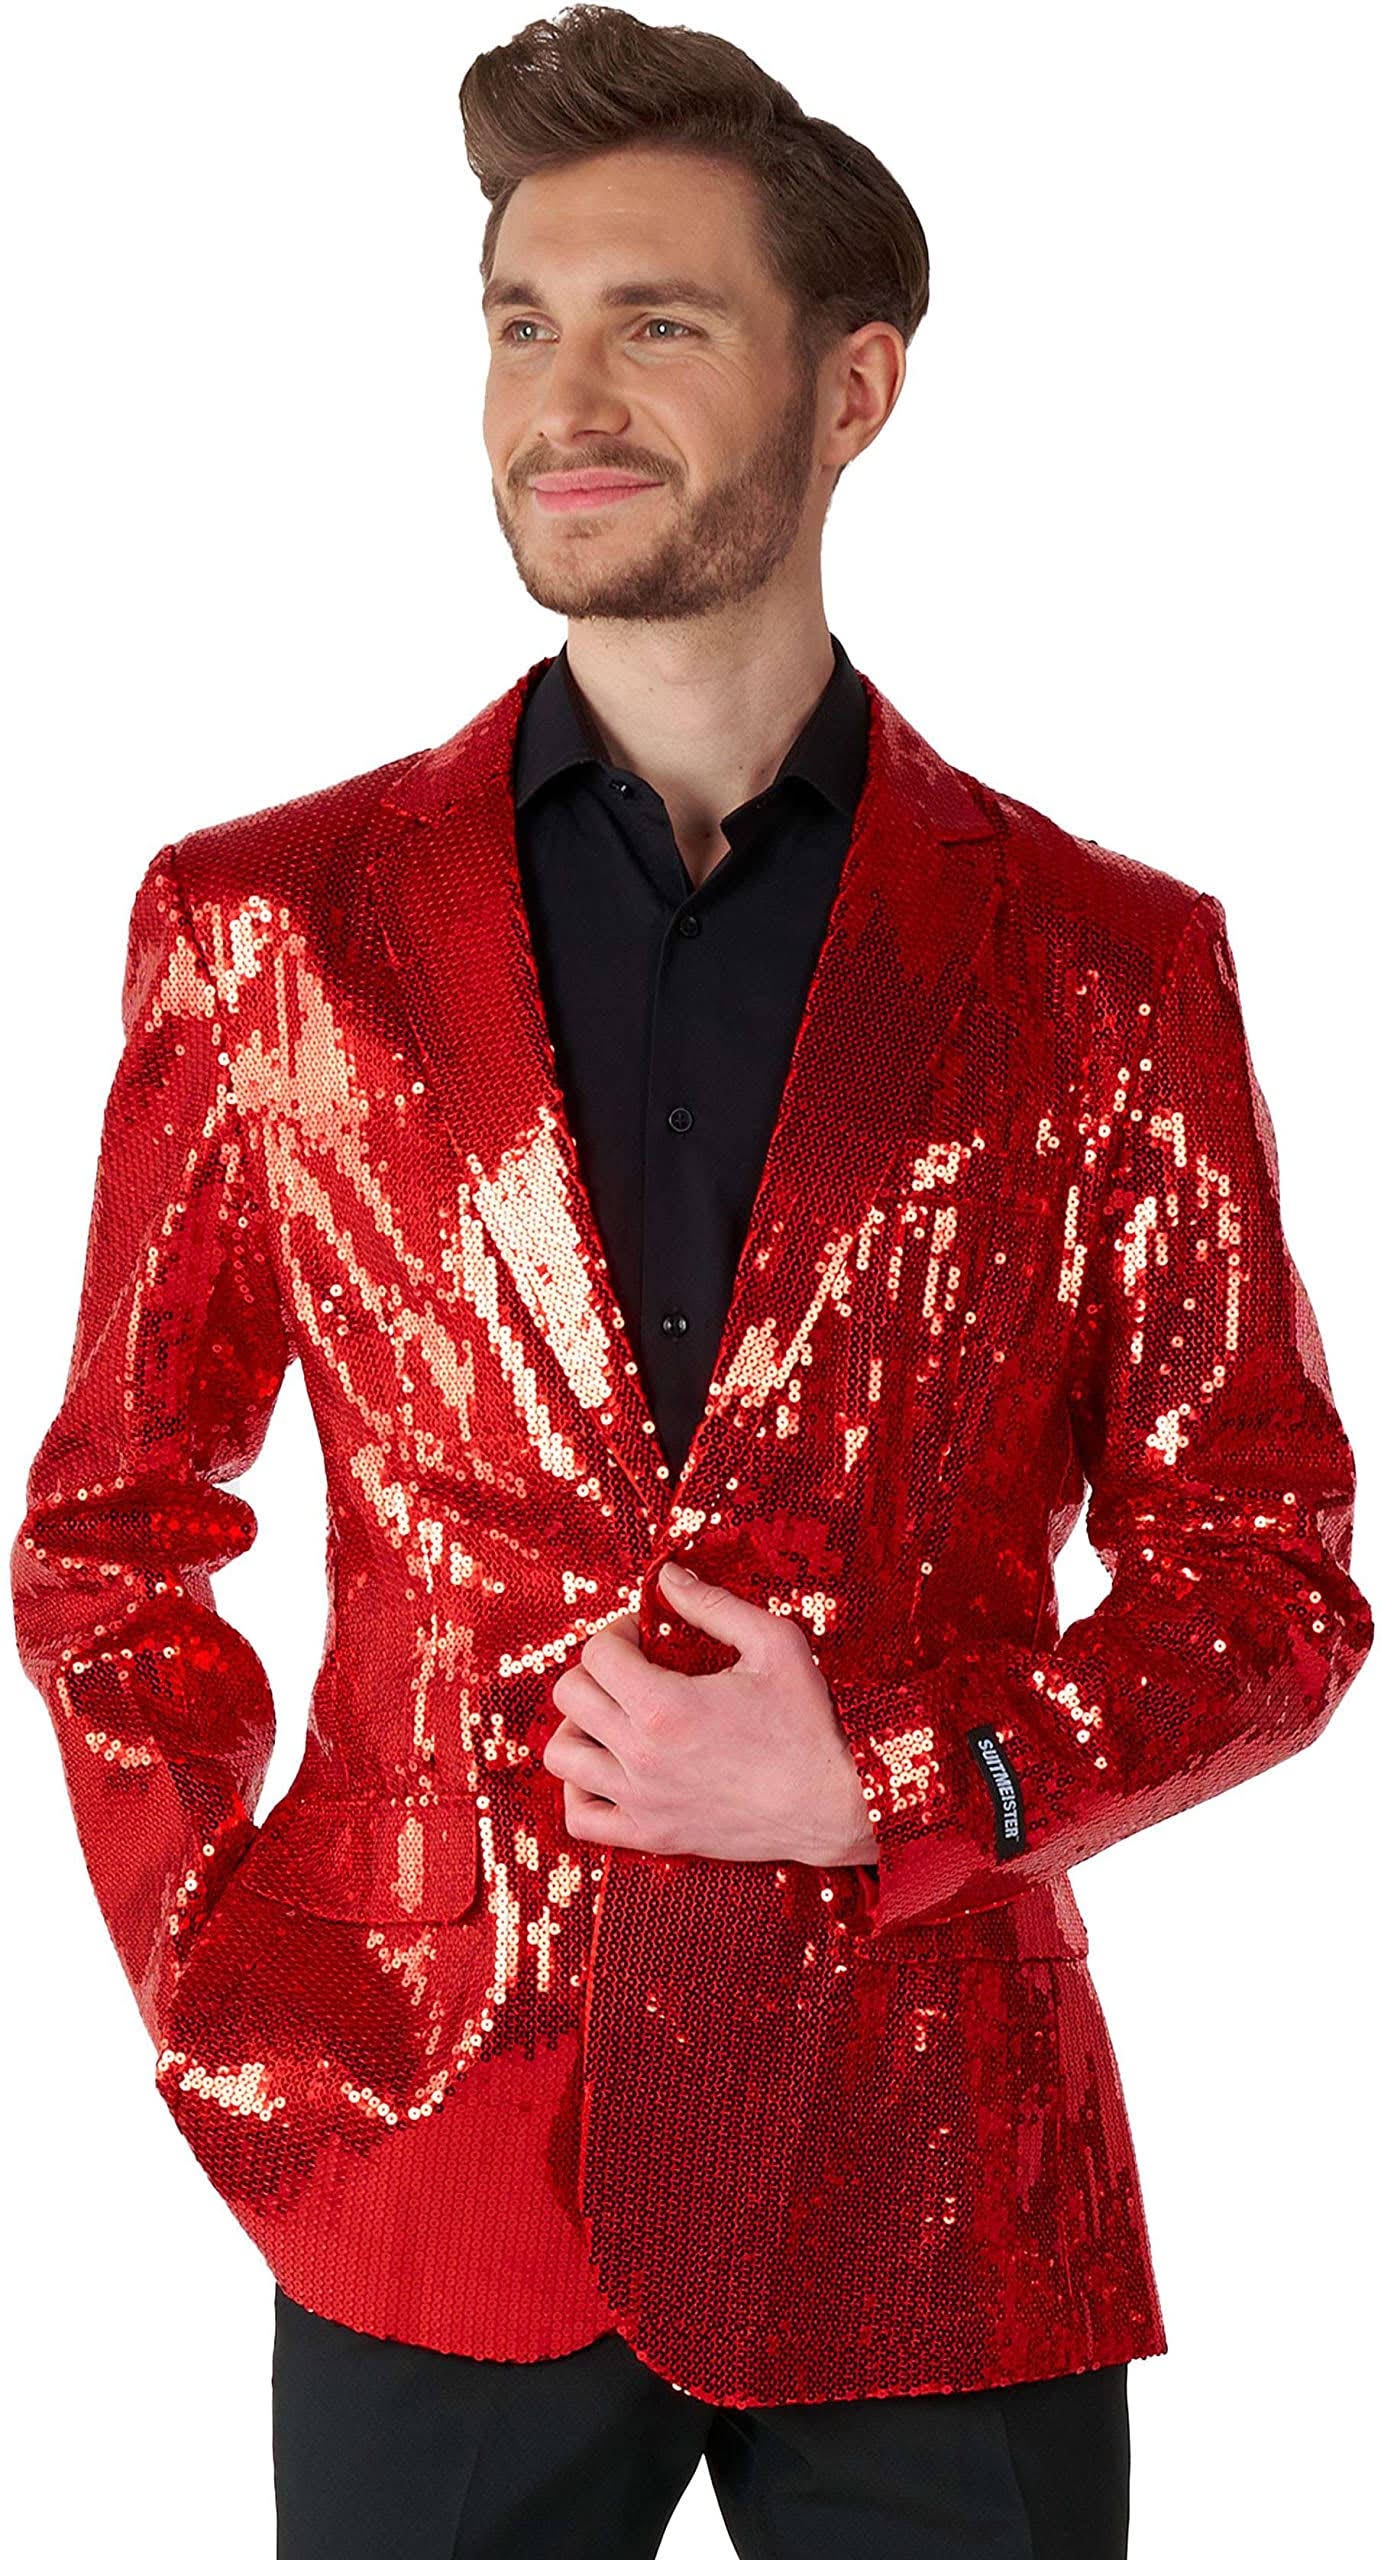 Shimmering Red Sequin Men's Suit Jacket for Stylish Events | Image